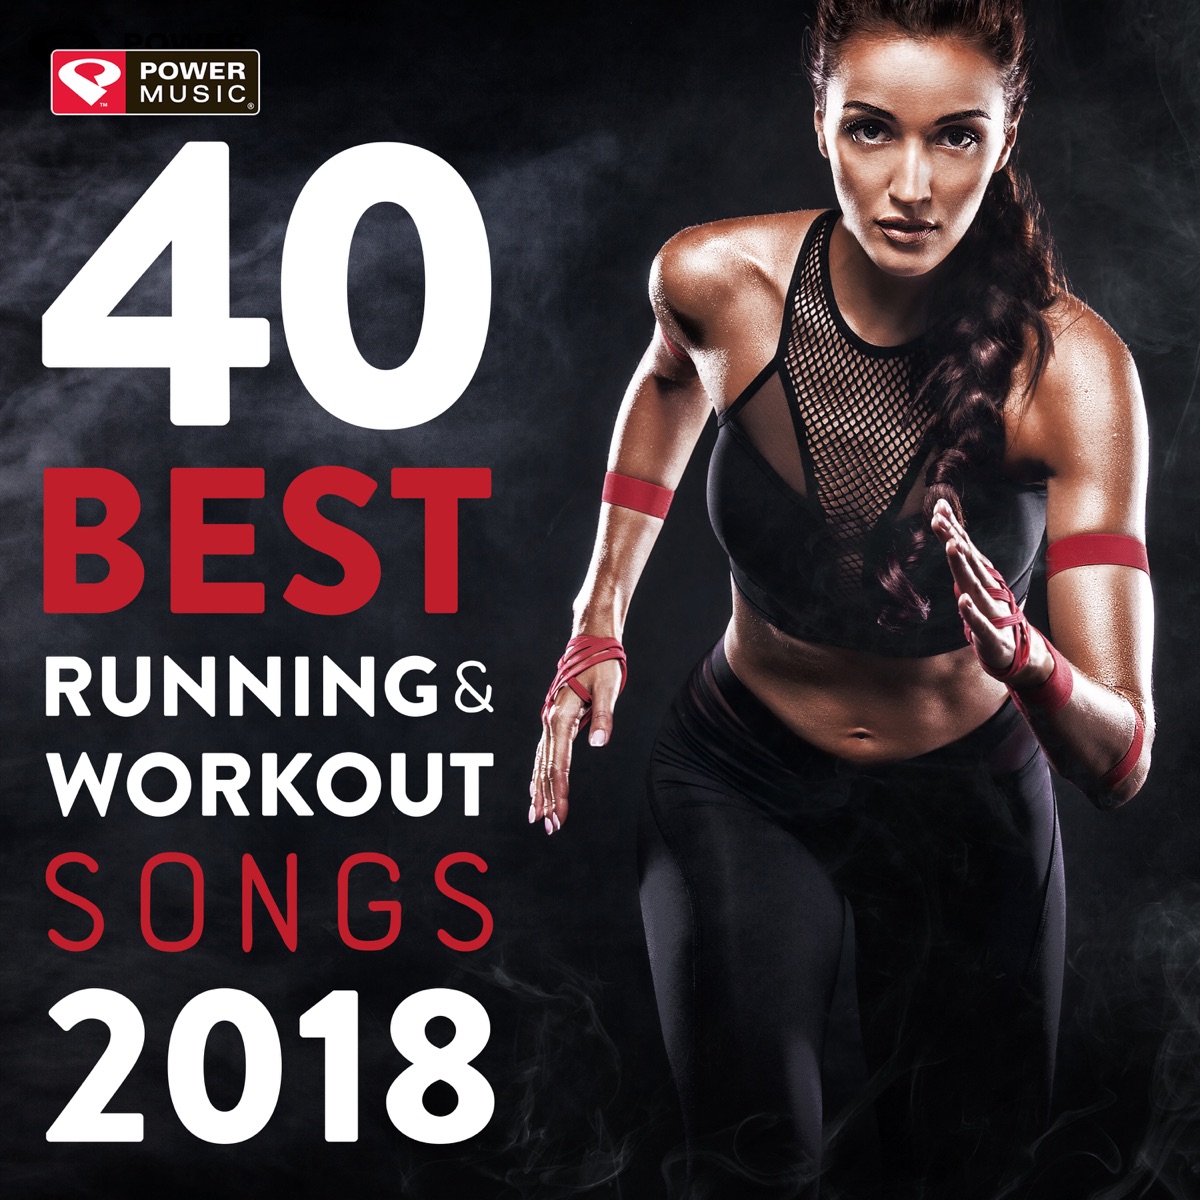 Unmixed Workout Music Ideal For Gym